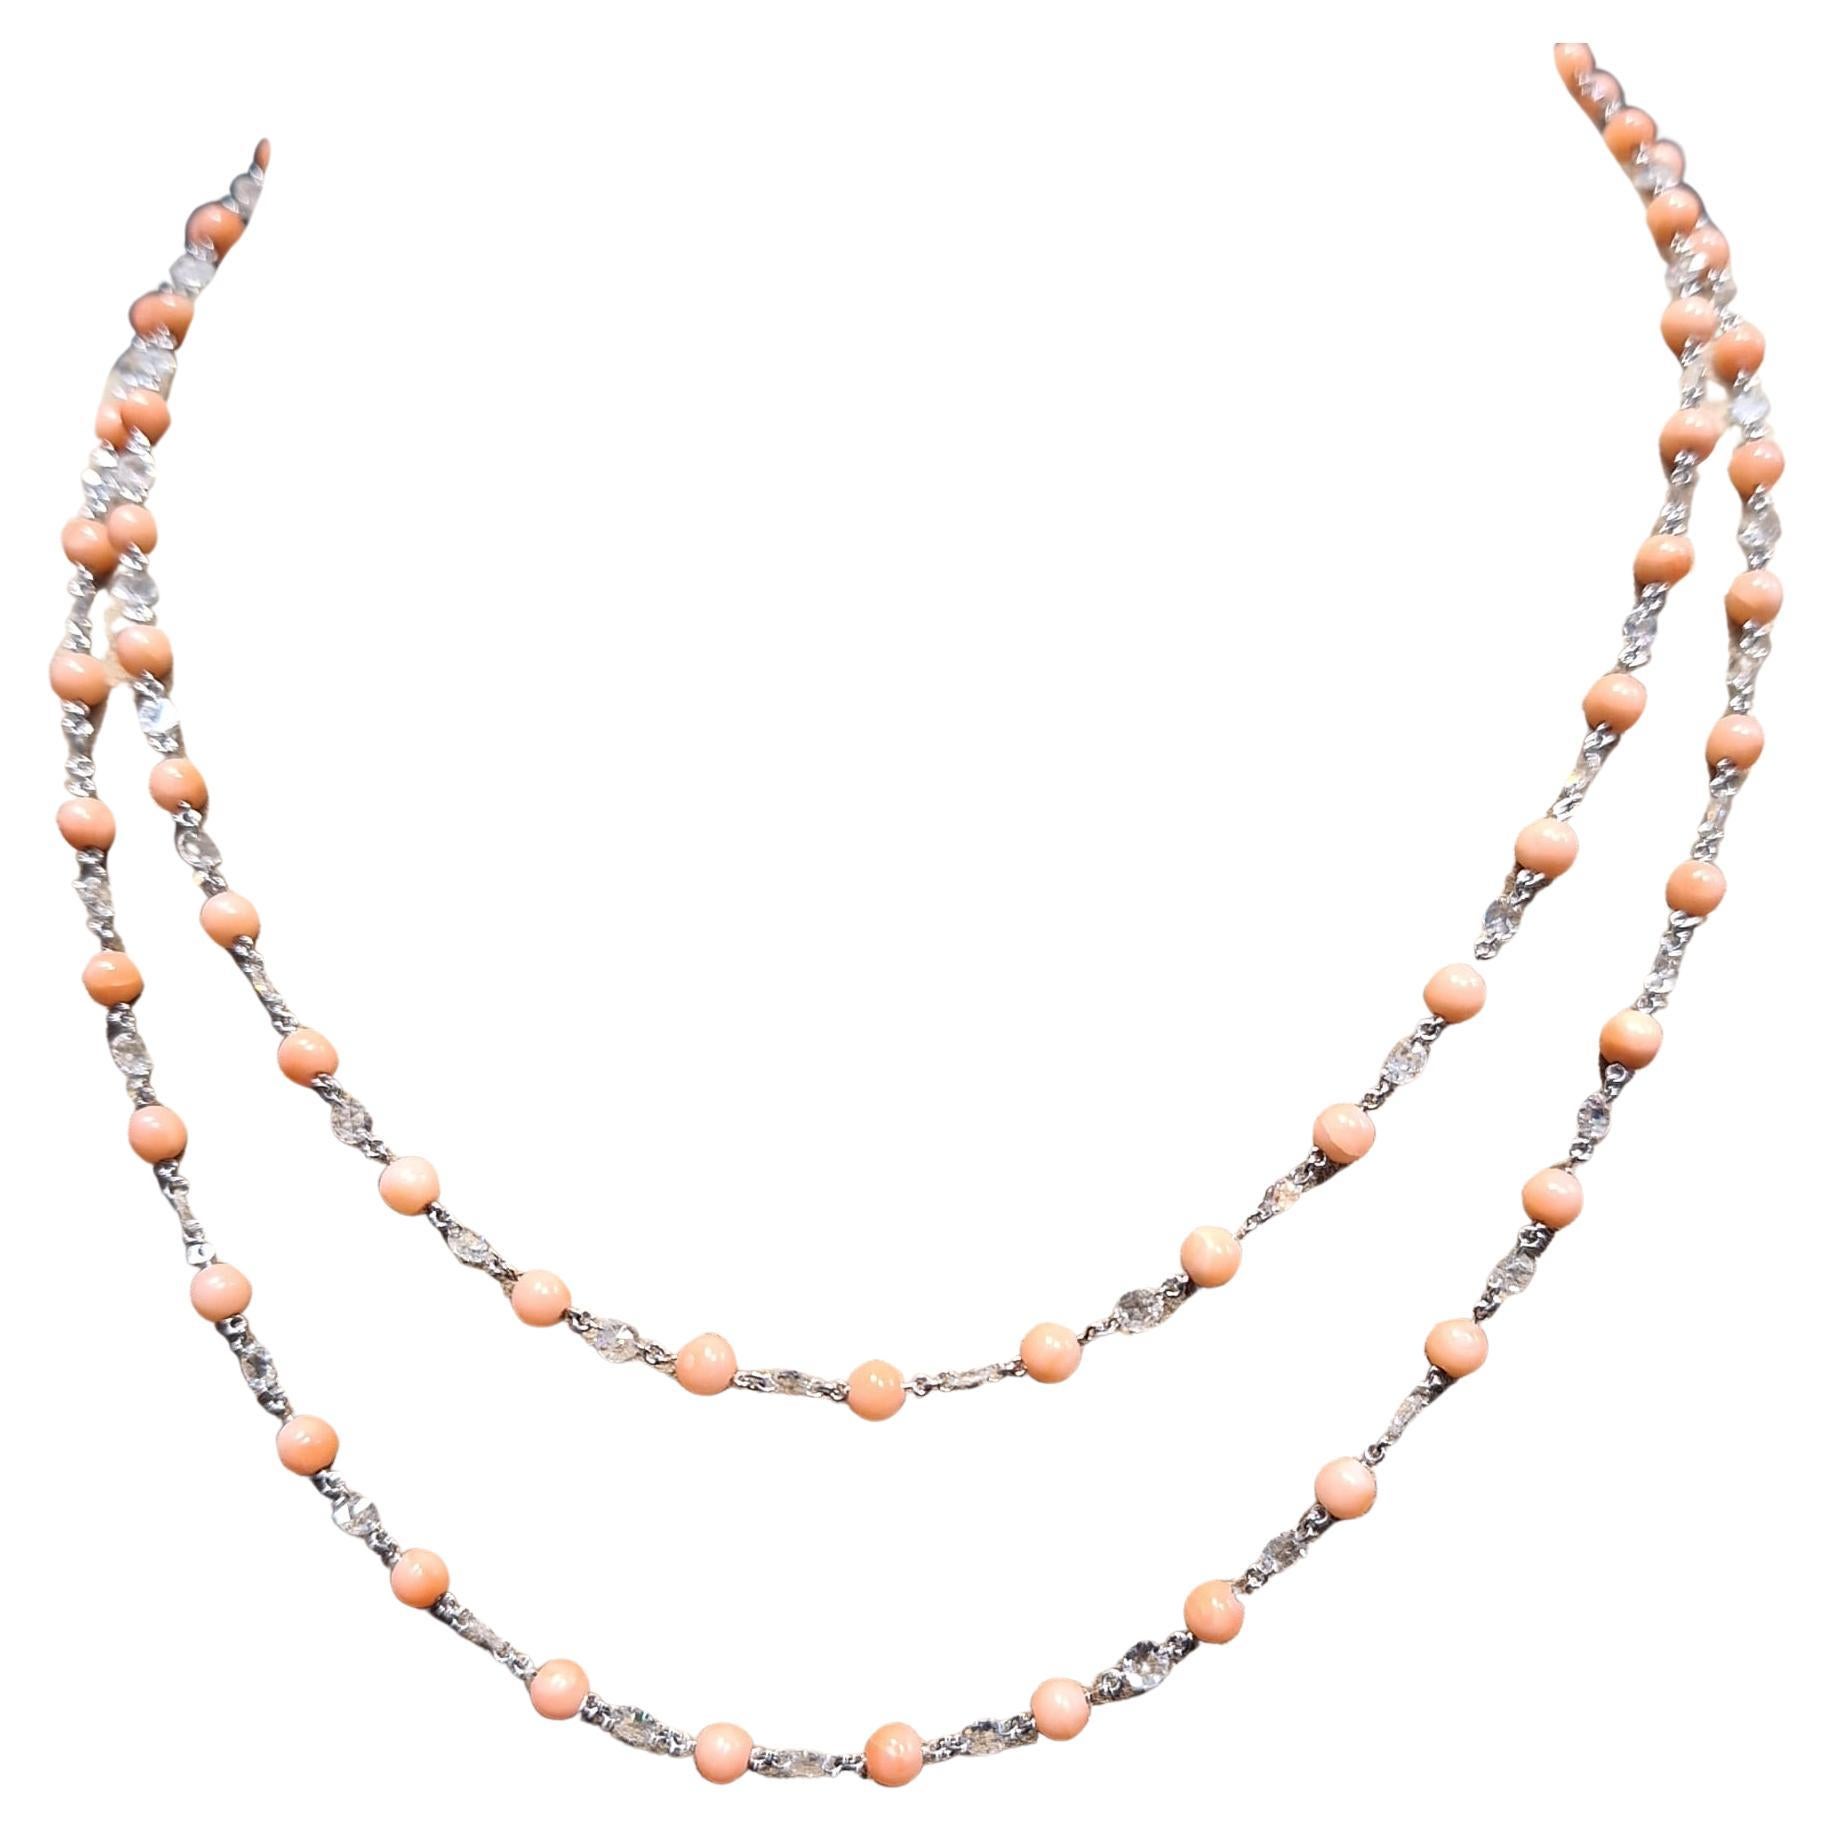 18K White Gold Diamond Necklace with Coral